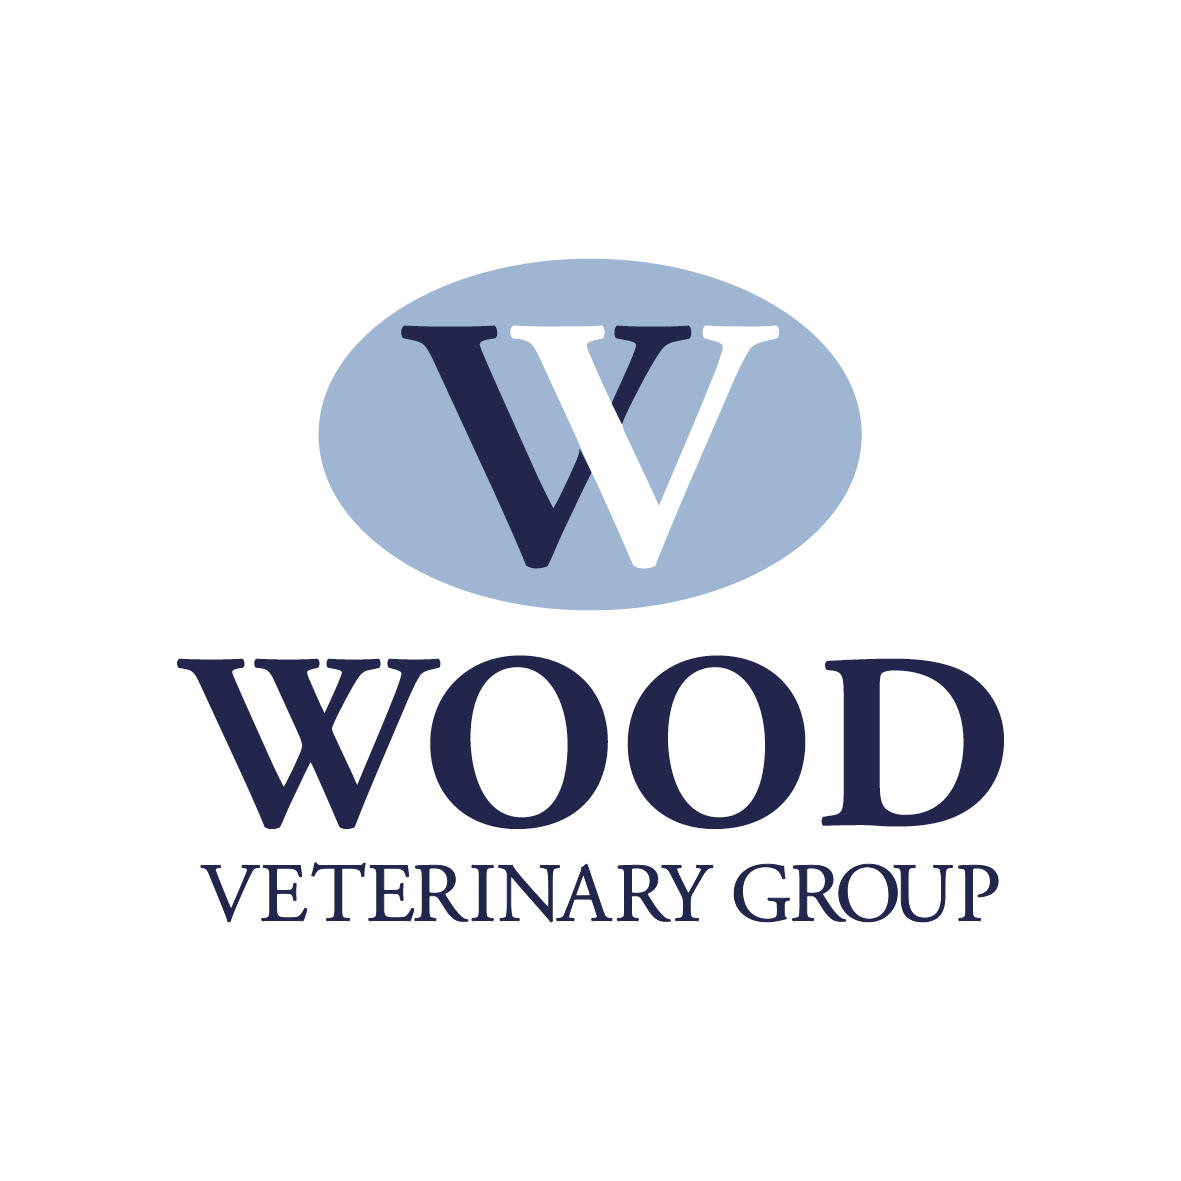 Wood Veterinary Group, Longlevens - Gloucester, Gloucestershire GL2 0LZ - 01452 543990 | ShowMeLocal.com